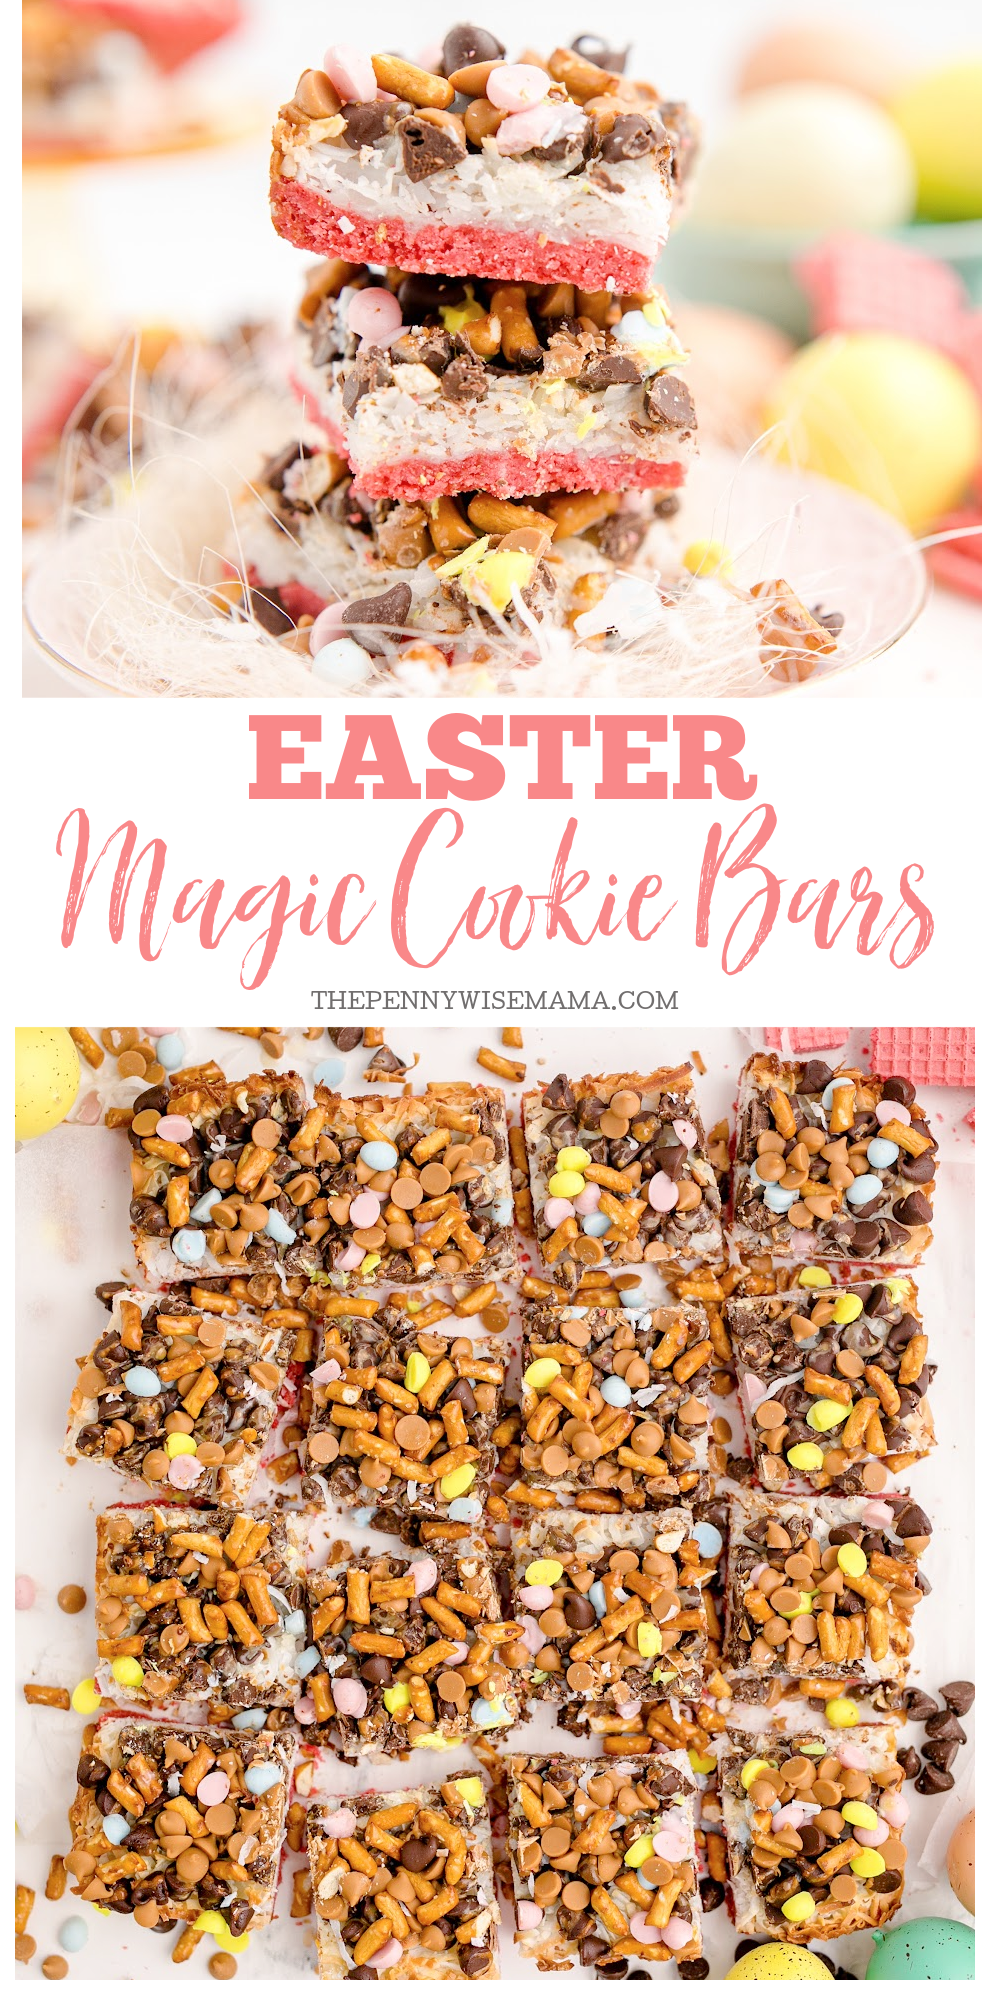 These Easter Magic Cookie Bars are the perfect Easter dessert! Not only are they colorful and fun, but they are also delicious and easy to make. Your whole family will love them!